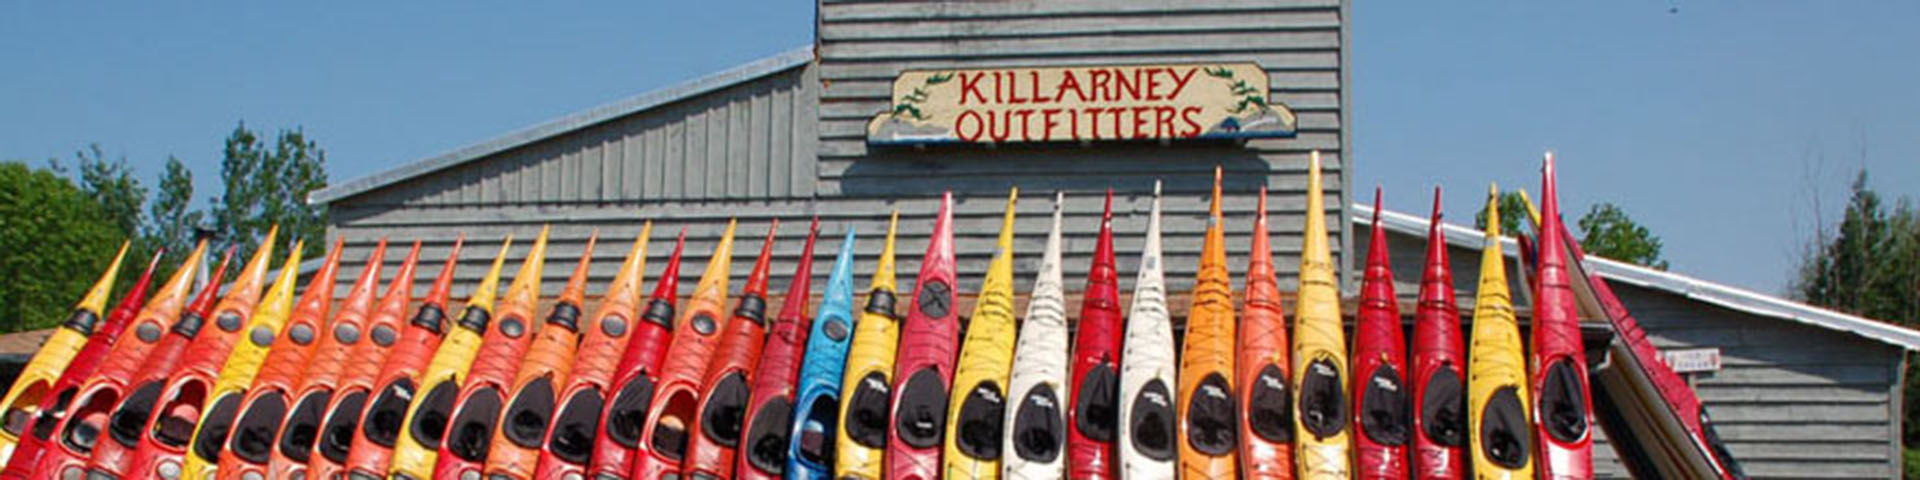 Expedition Sea Kayak Rental by Killarney Outfitters - Image 139